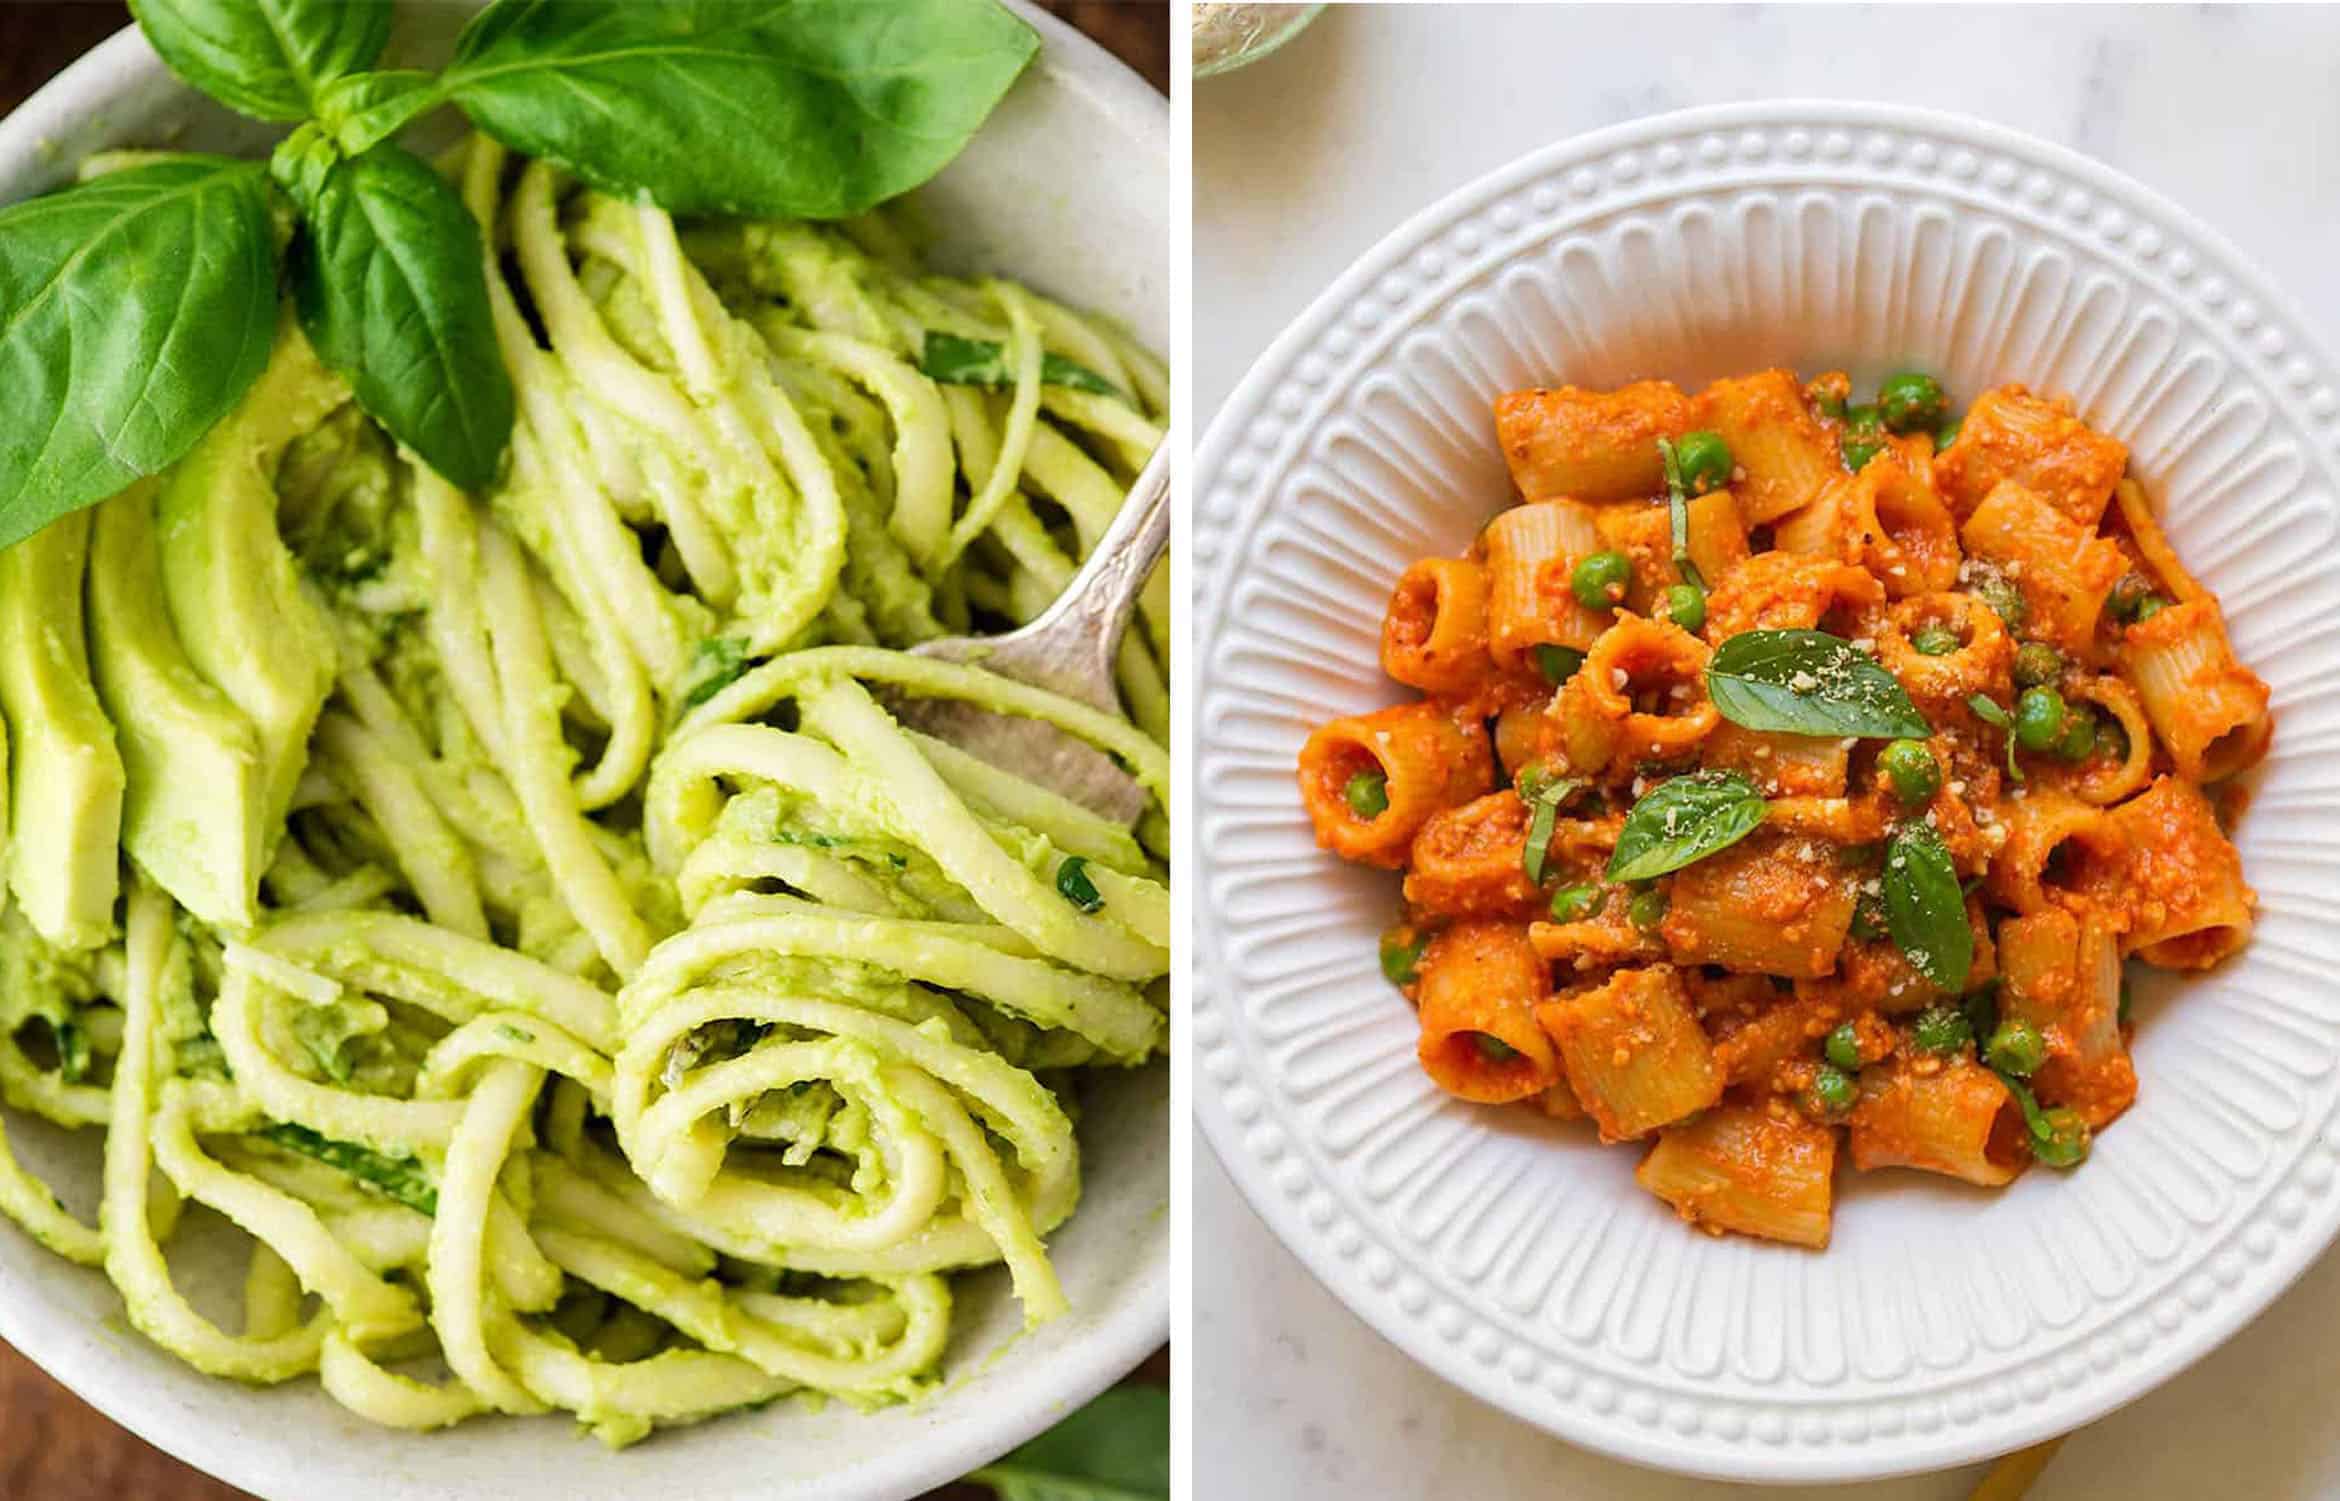 Avocado spaghetti in a white bowl with basil leaves by Joy Food Sunshine and pasta with peas and red pepper sauce in a white bowl by The Simple Veganista